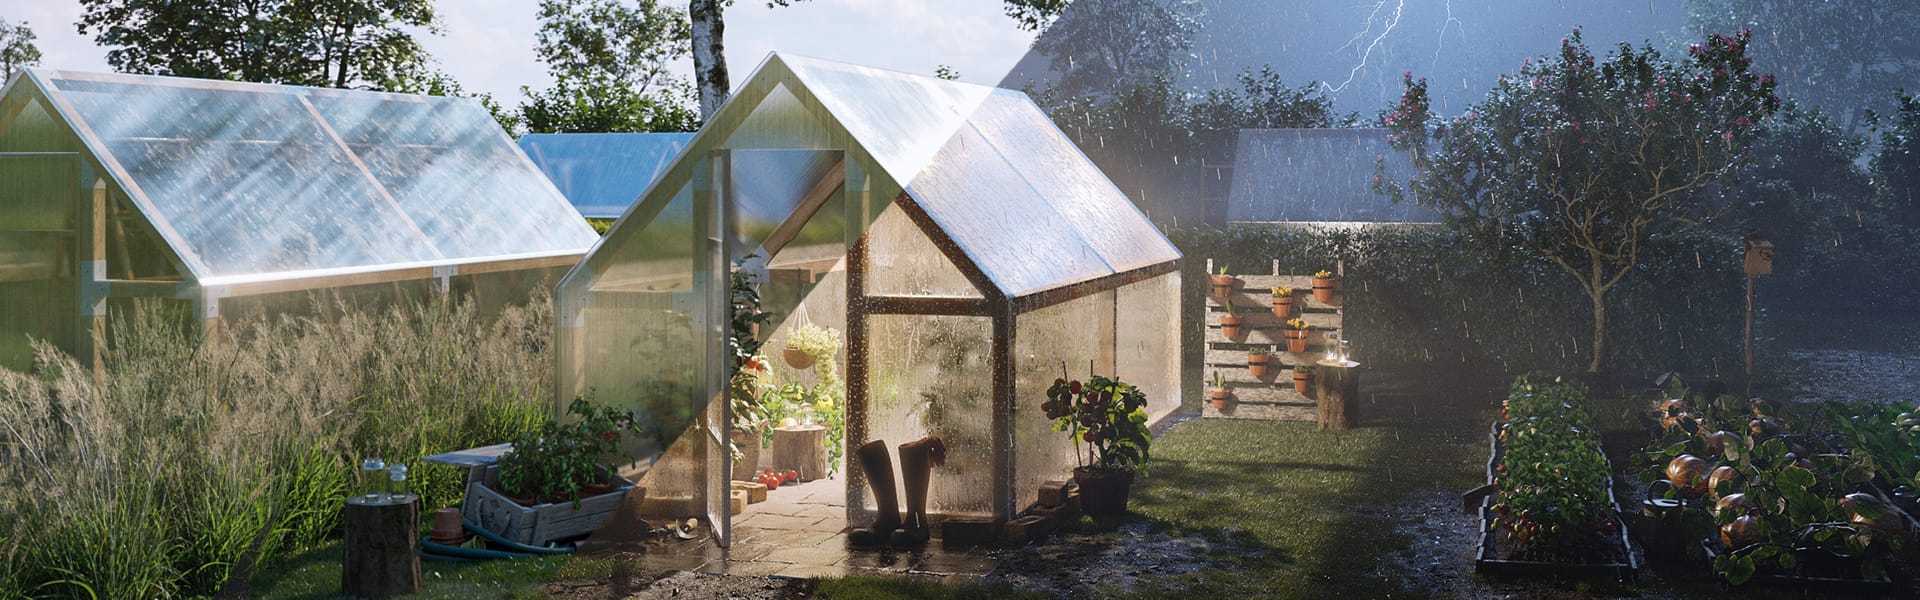 A sunny and stormy greenhouse scene